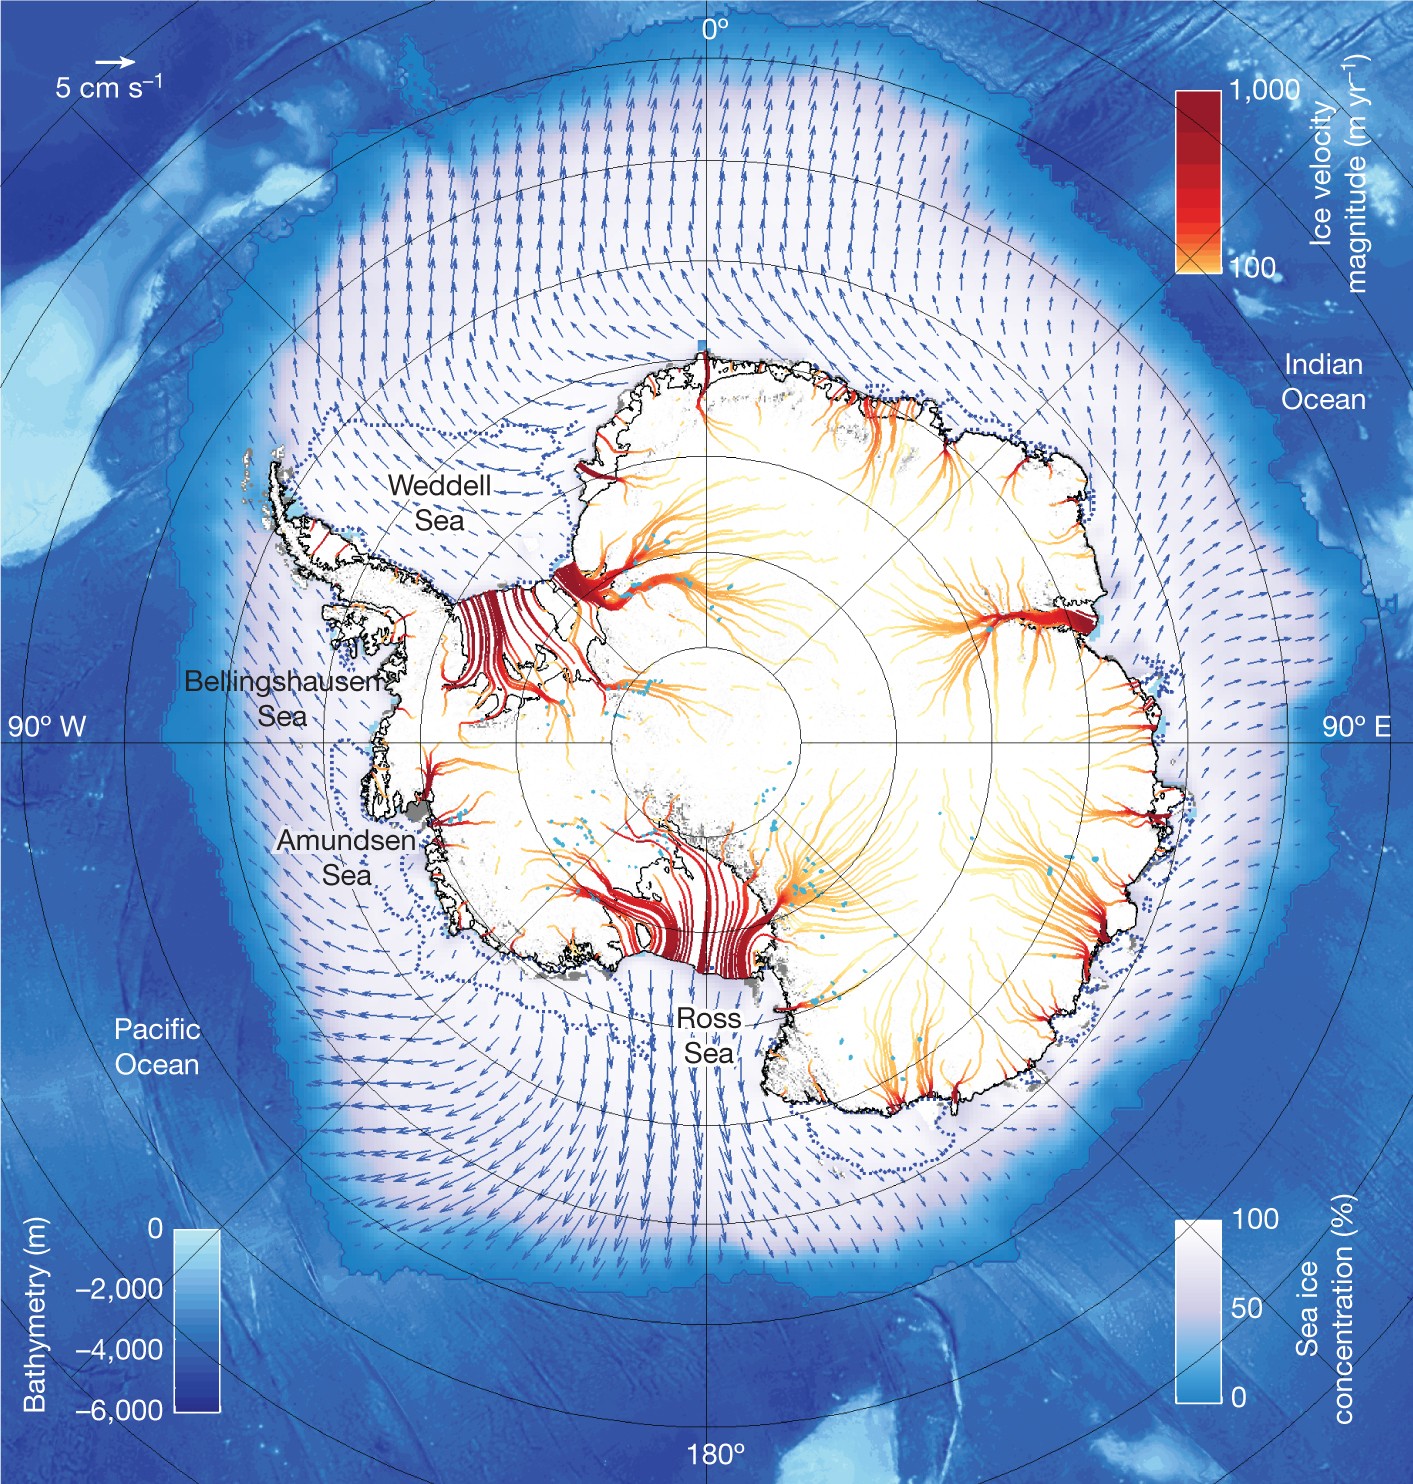 Trends and connections across the Antarctic cryosphere | Nature